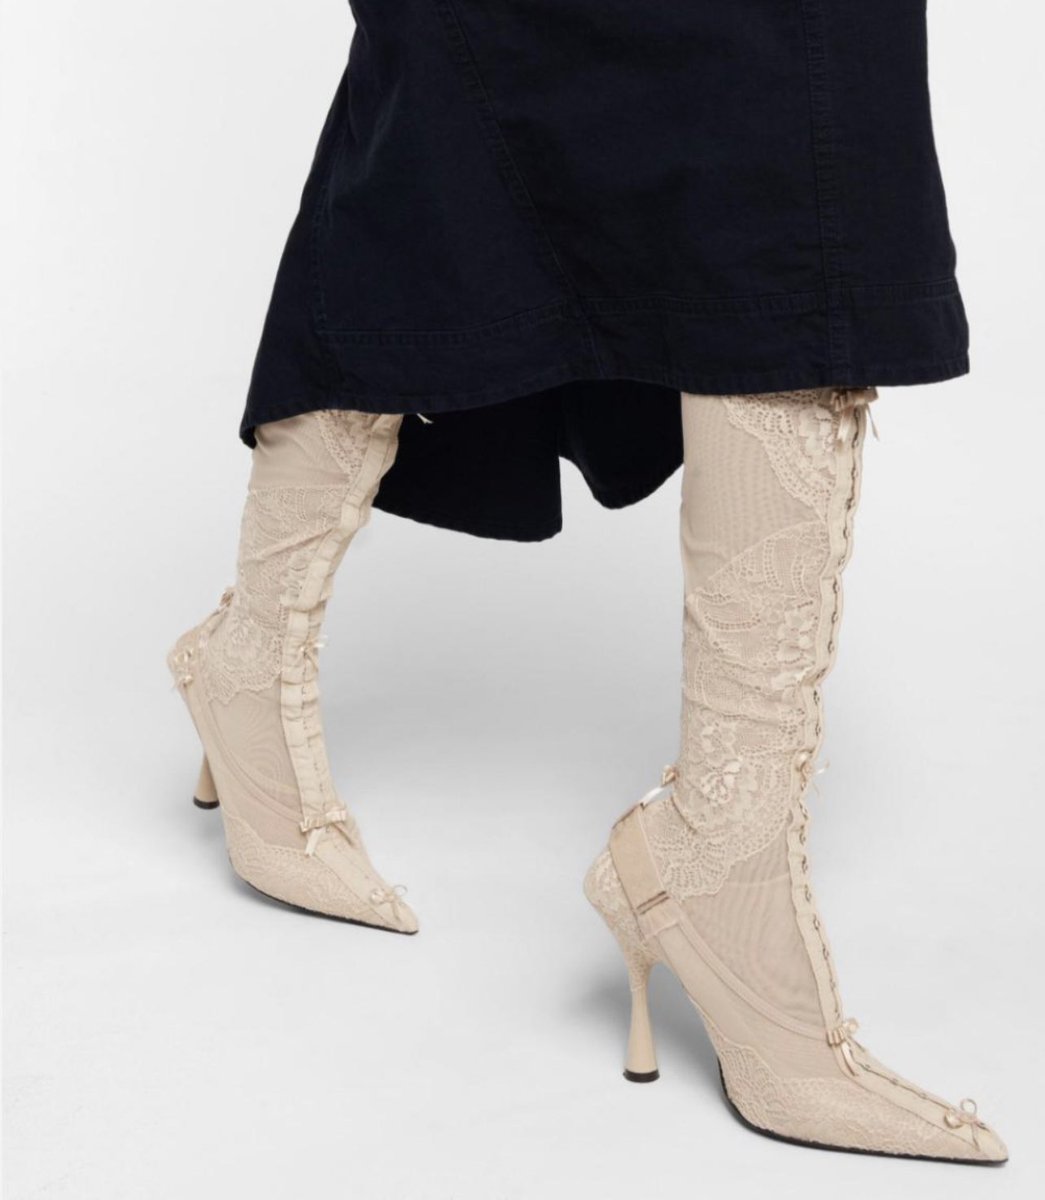 the balenci’s fw20 lingerie boots will always win for me